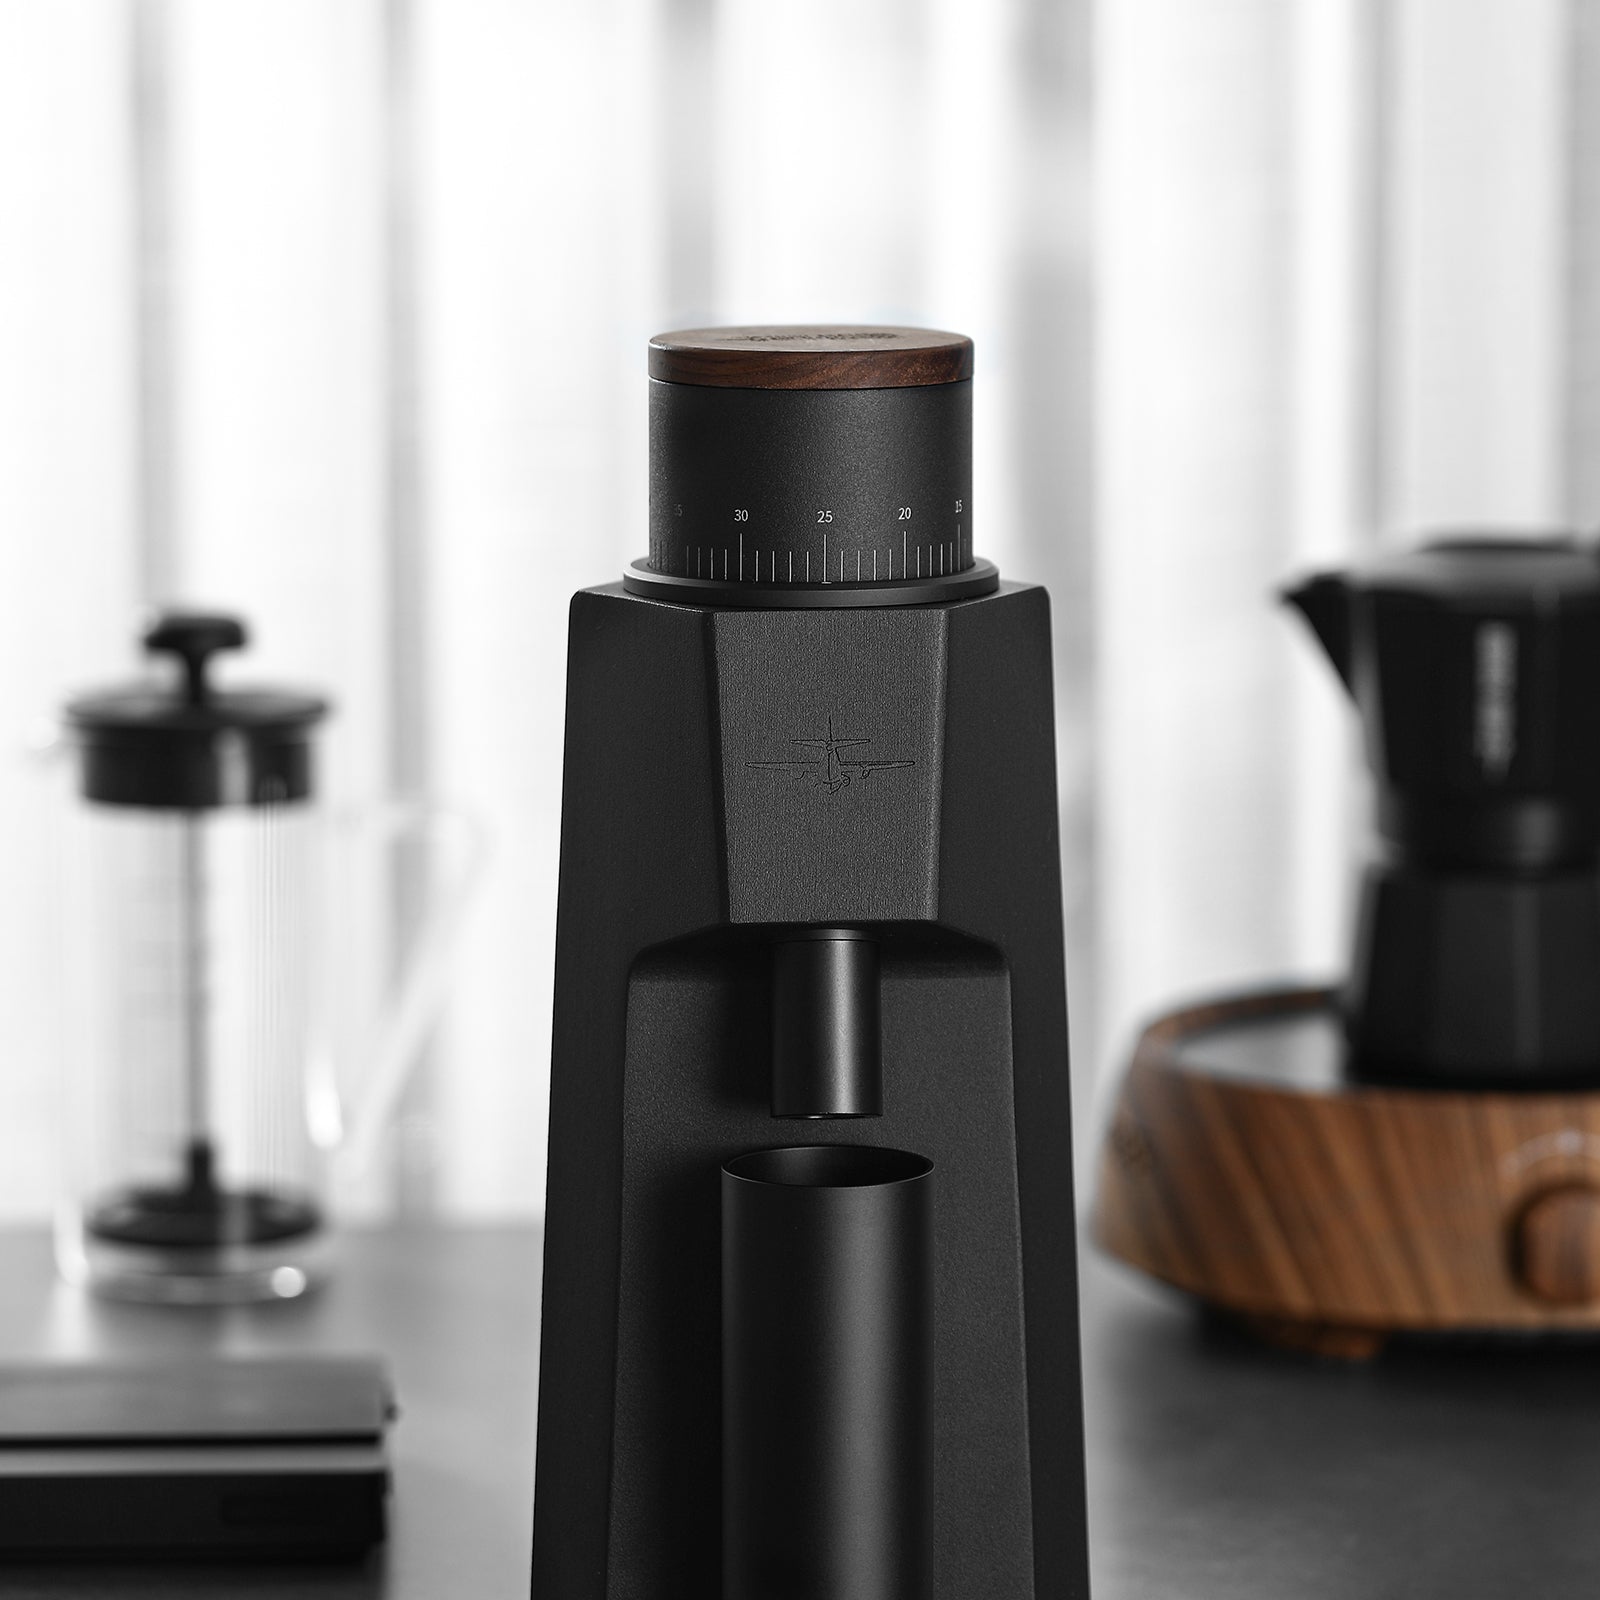 MHW-3BOMBER Sniper Electric Coffee Grinder